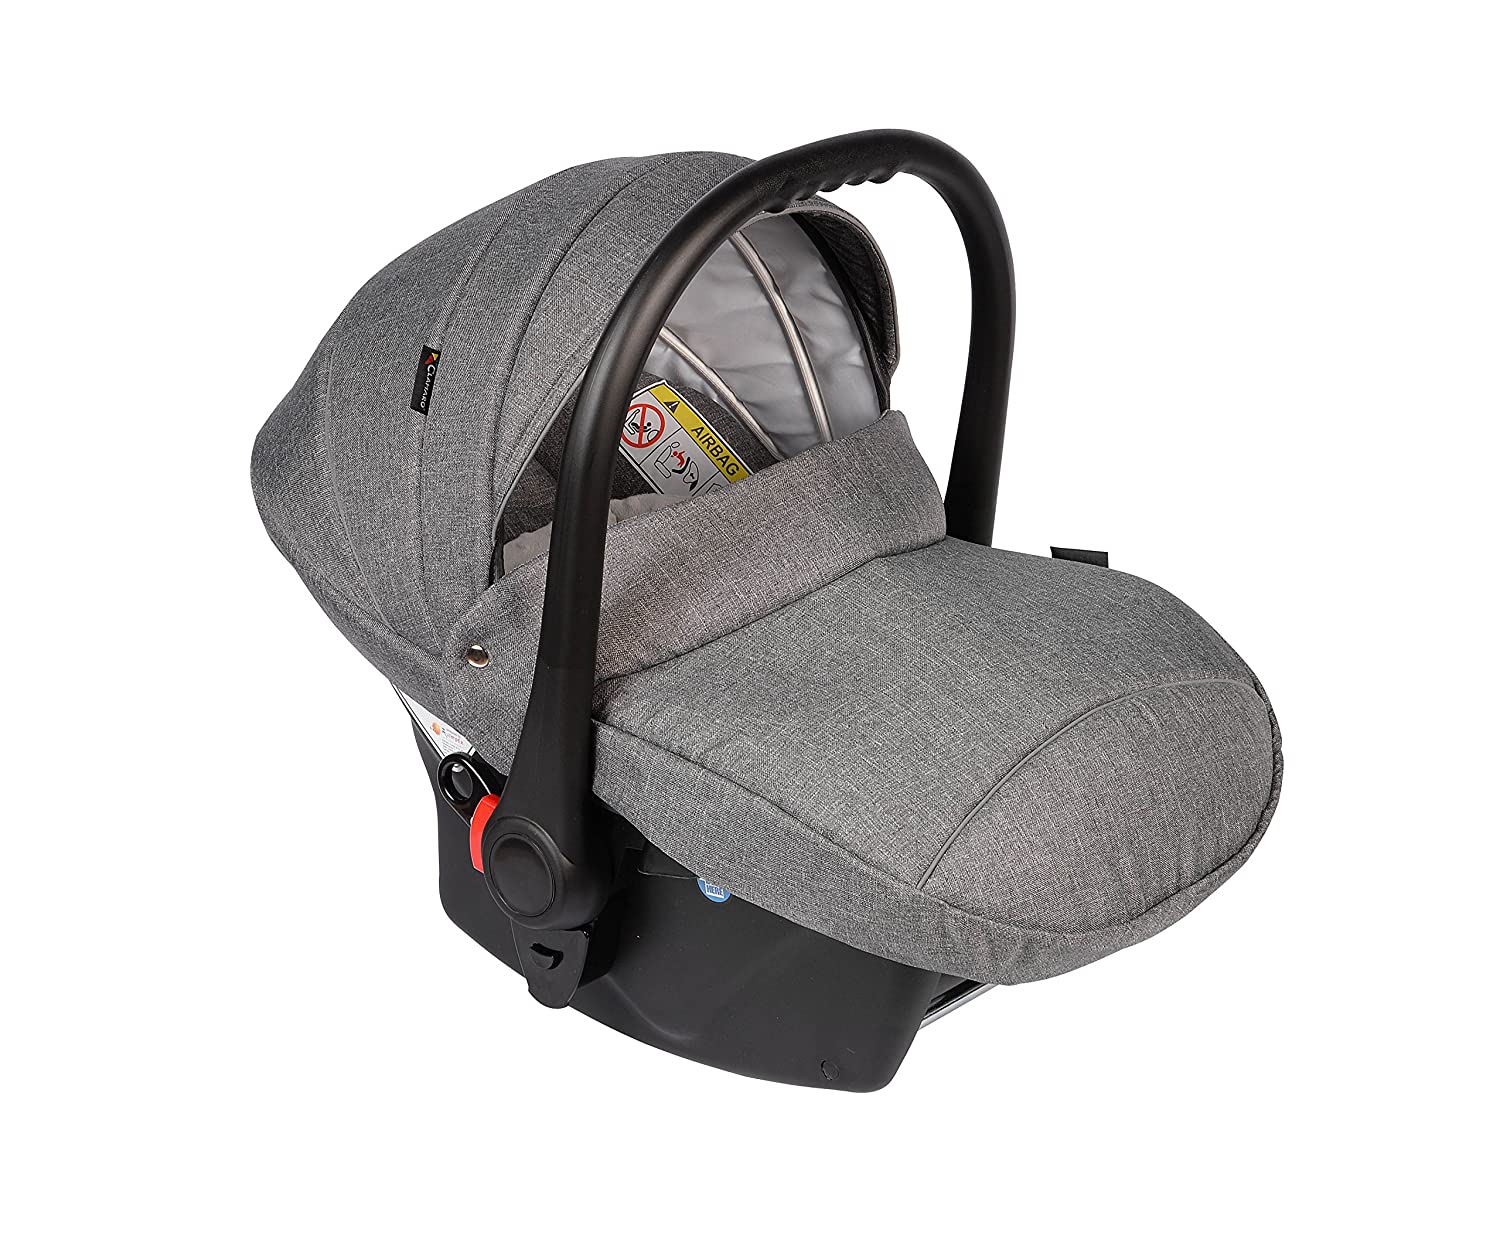 Clamaro JUNO Black Baby Car Seat Ultralight 2.95 kg with Anti-Shock Foam Group 0+ (0-13 kg) ECE-R 44/04 - Baby Car Seat Including Sun Canopy and Foot Cover - Dark Grey Linen